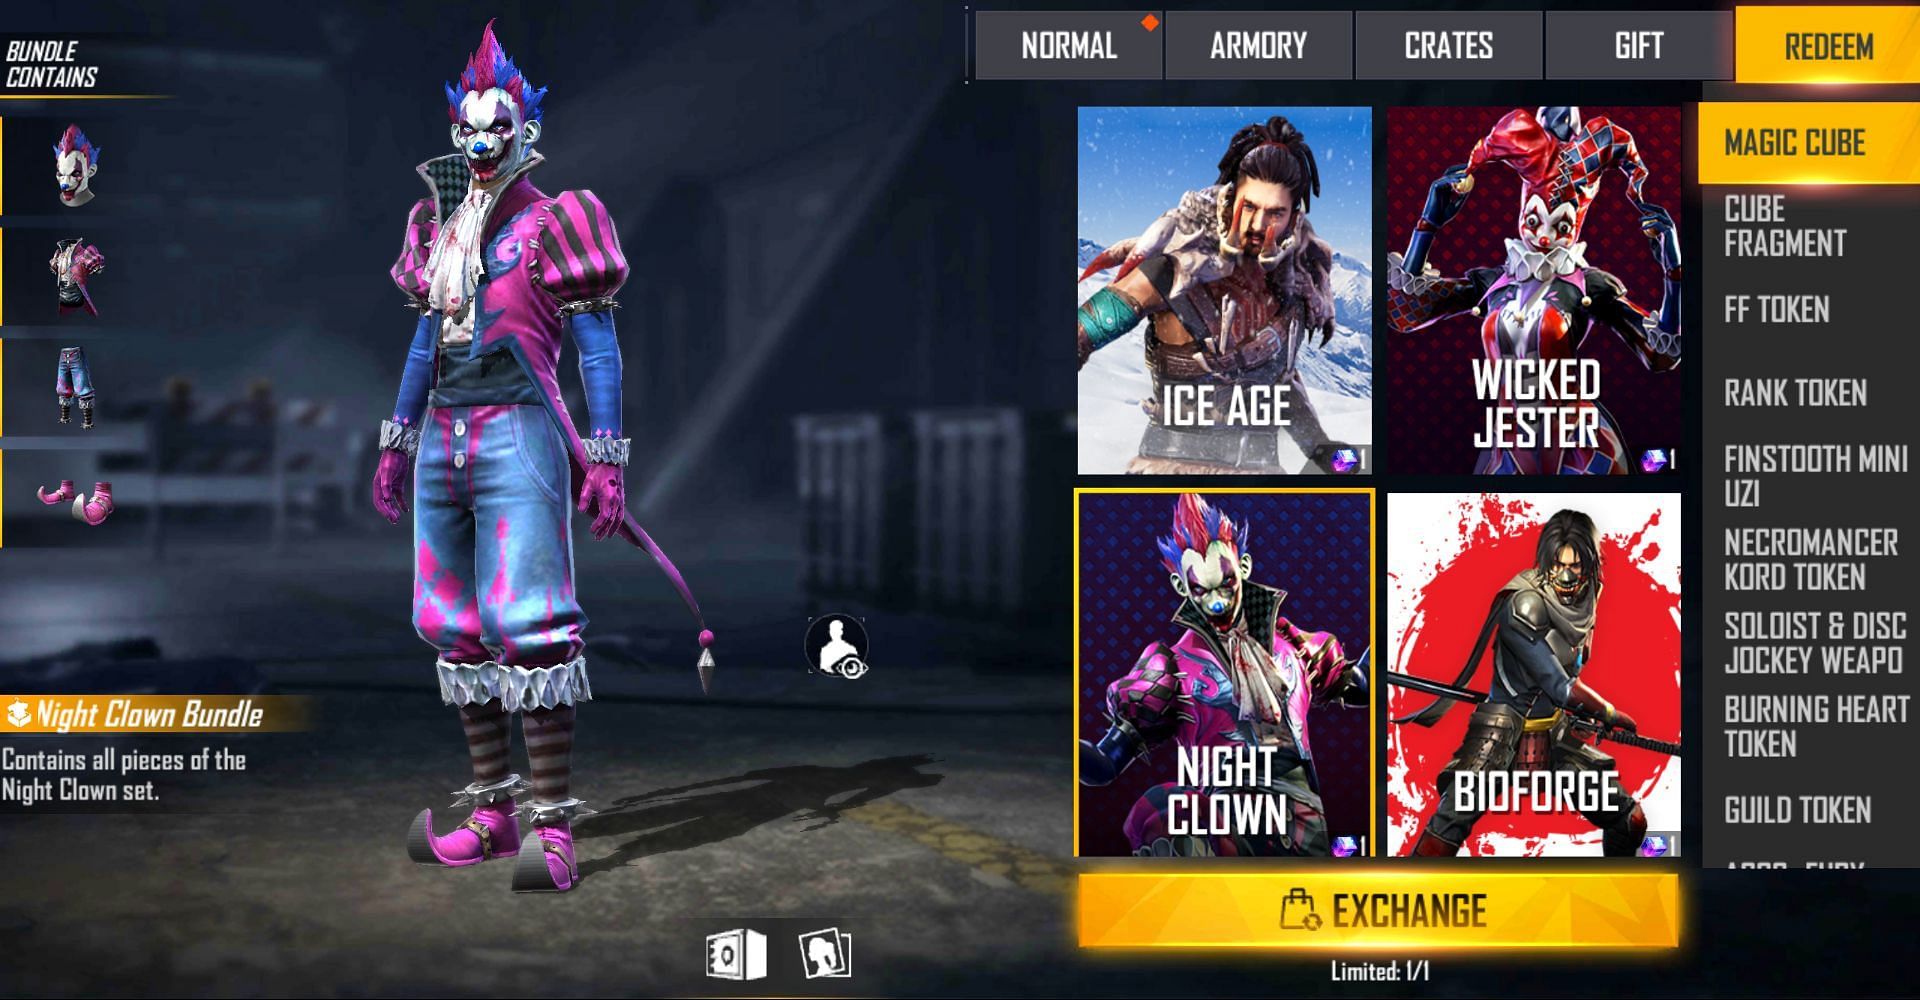 Night Clown Bundle was available in the Magic Cube section a few months back (Image via Free Fire)